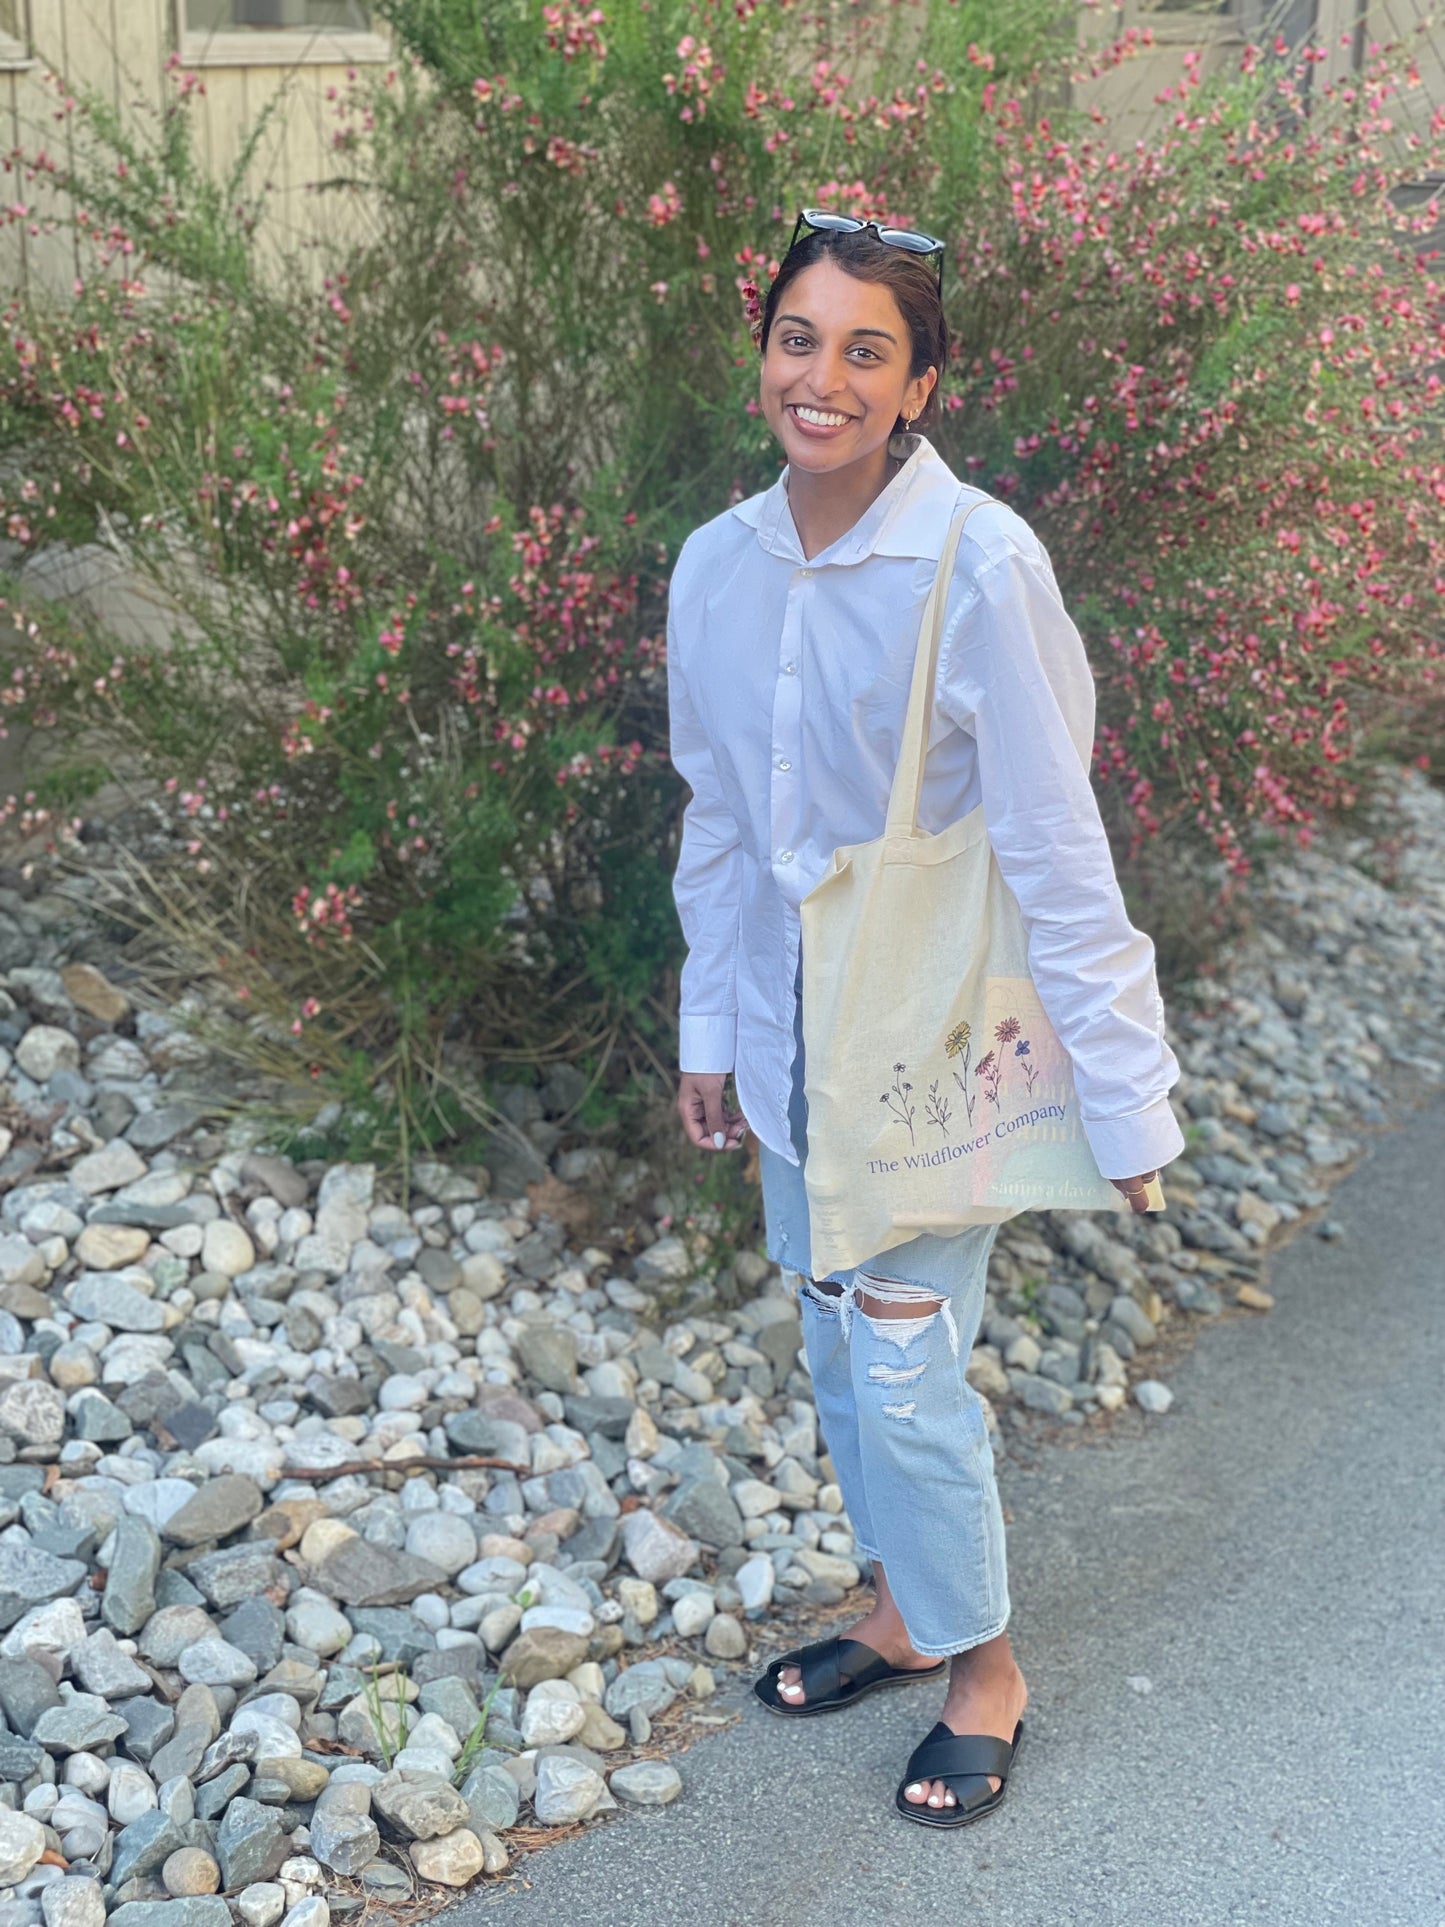 The Wildflower Company Tote